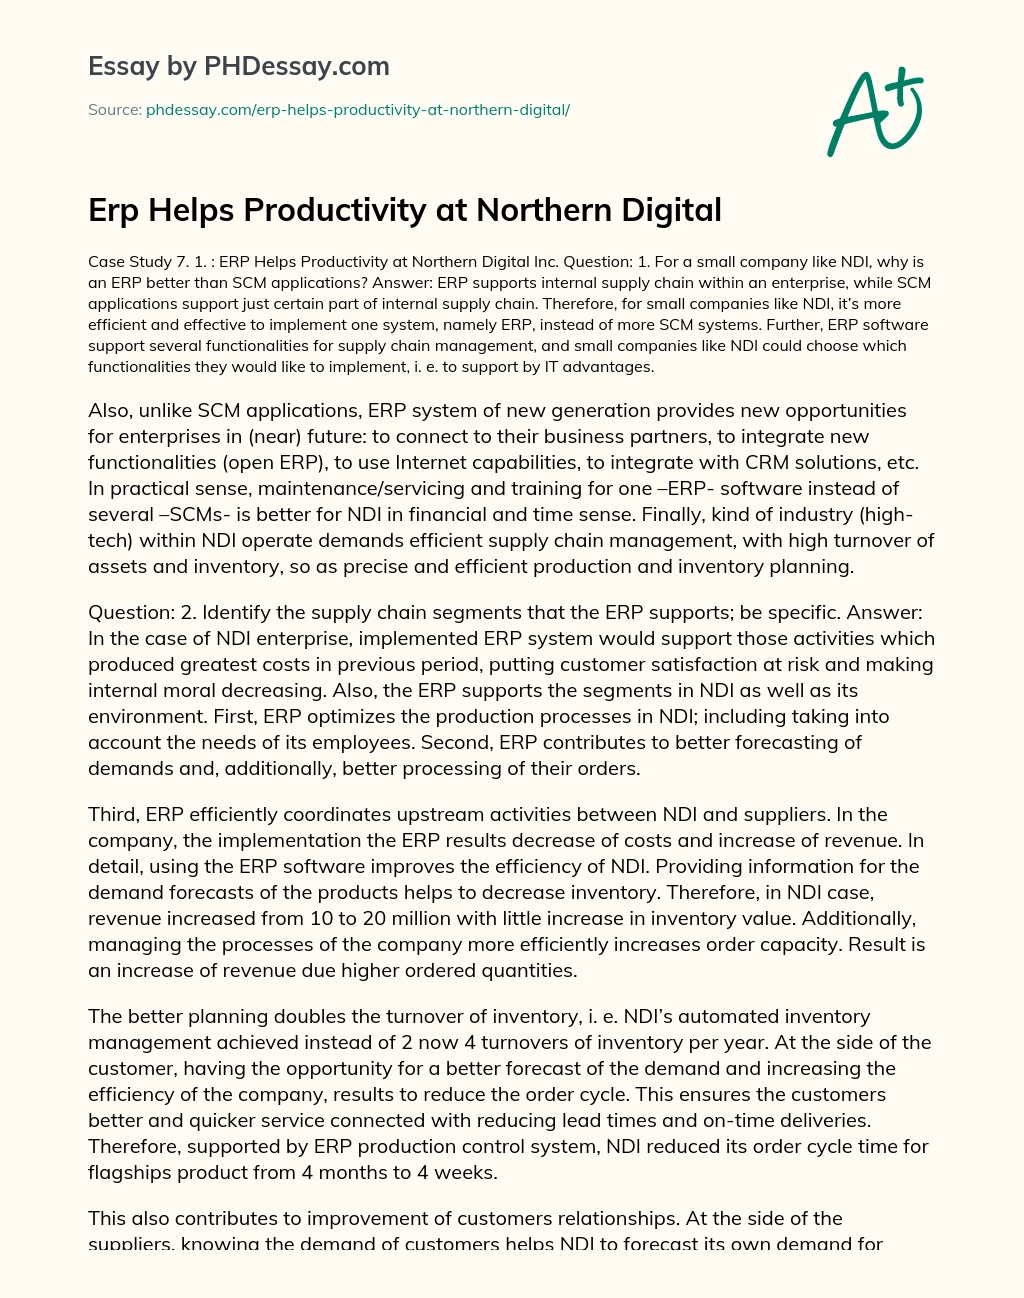 Erp Helps Productivity at Northern Digital essay